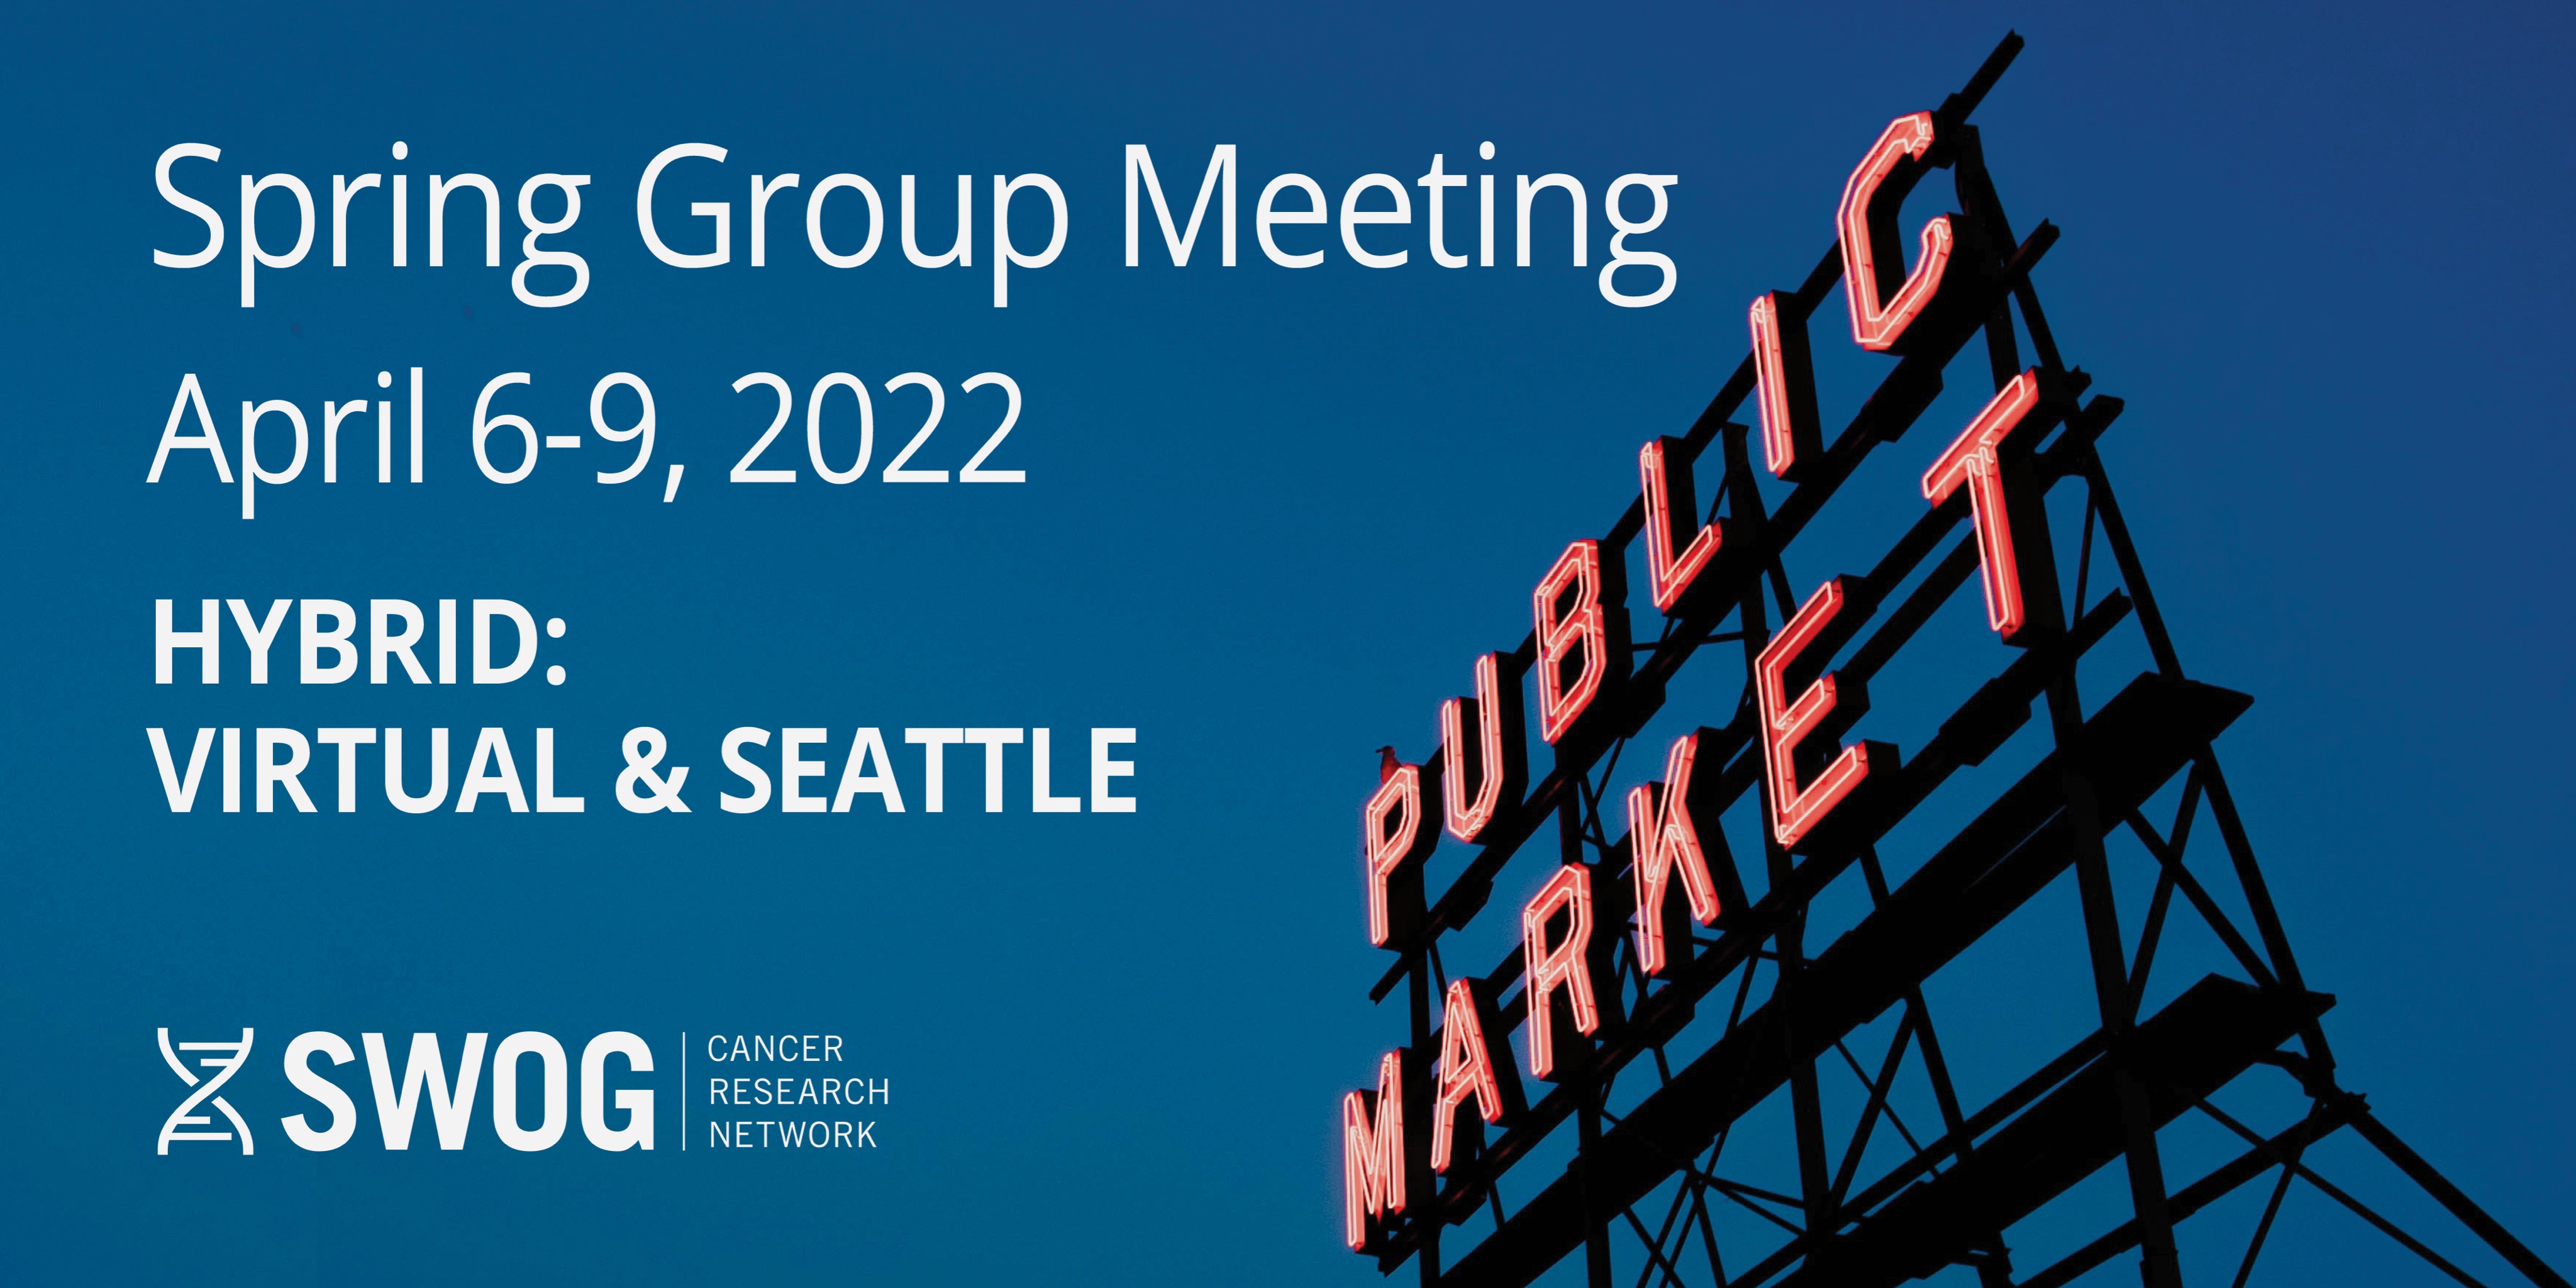 SWOG Cancer Research Network on Twitter "Our spring 2022 group meeting